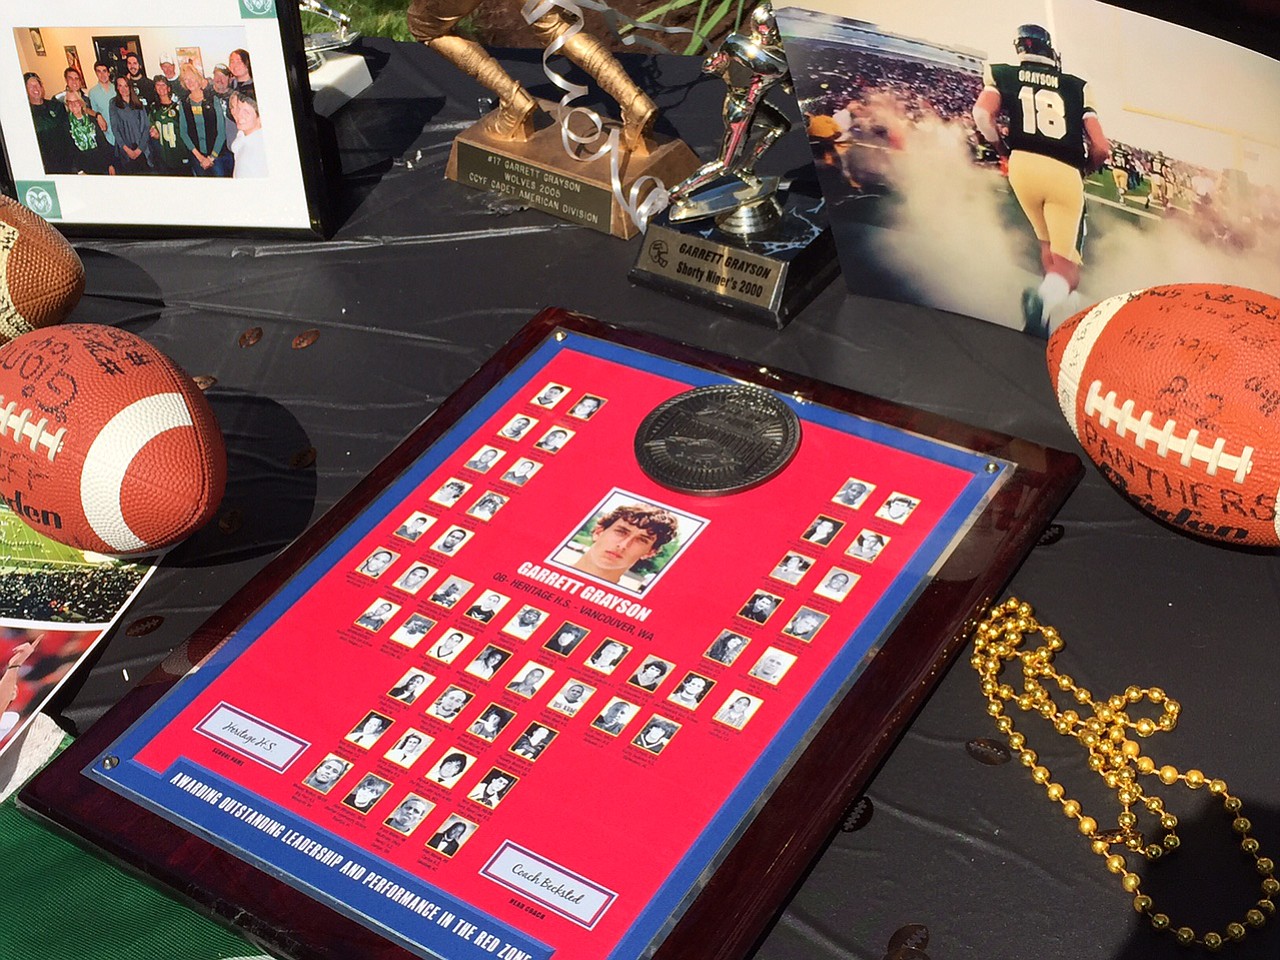 Mementoes from Garrett Grayson's youth and high school football days were on display Saturday at a party in Orchards. Grayson gathered with friends and relatives to celebrate him being drafted by the New Orleans Saints on Friday.